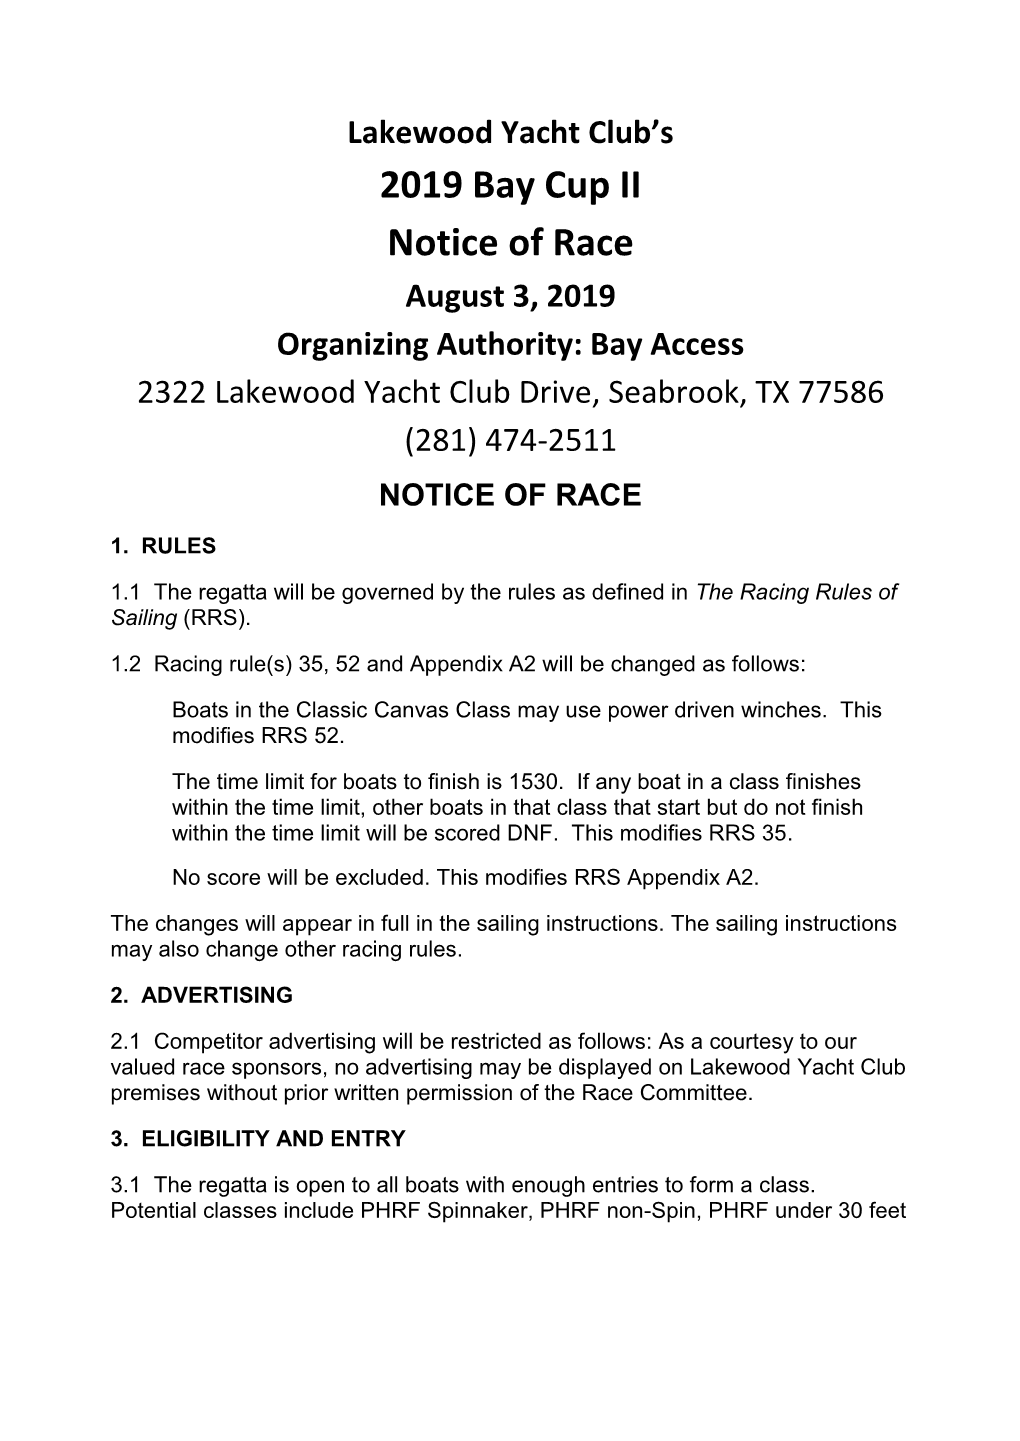 2019 Bay Cup II Notice of Race August 3, 2019 Organizing Authority: Bay Access 2322 Lakewood Yacht Club Drive, Seabrook, TX 77586 (281) 474-2511 NOTICE of RACE